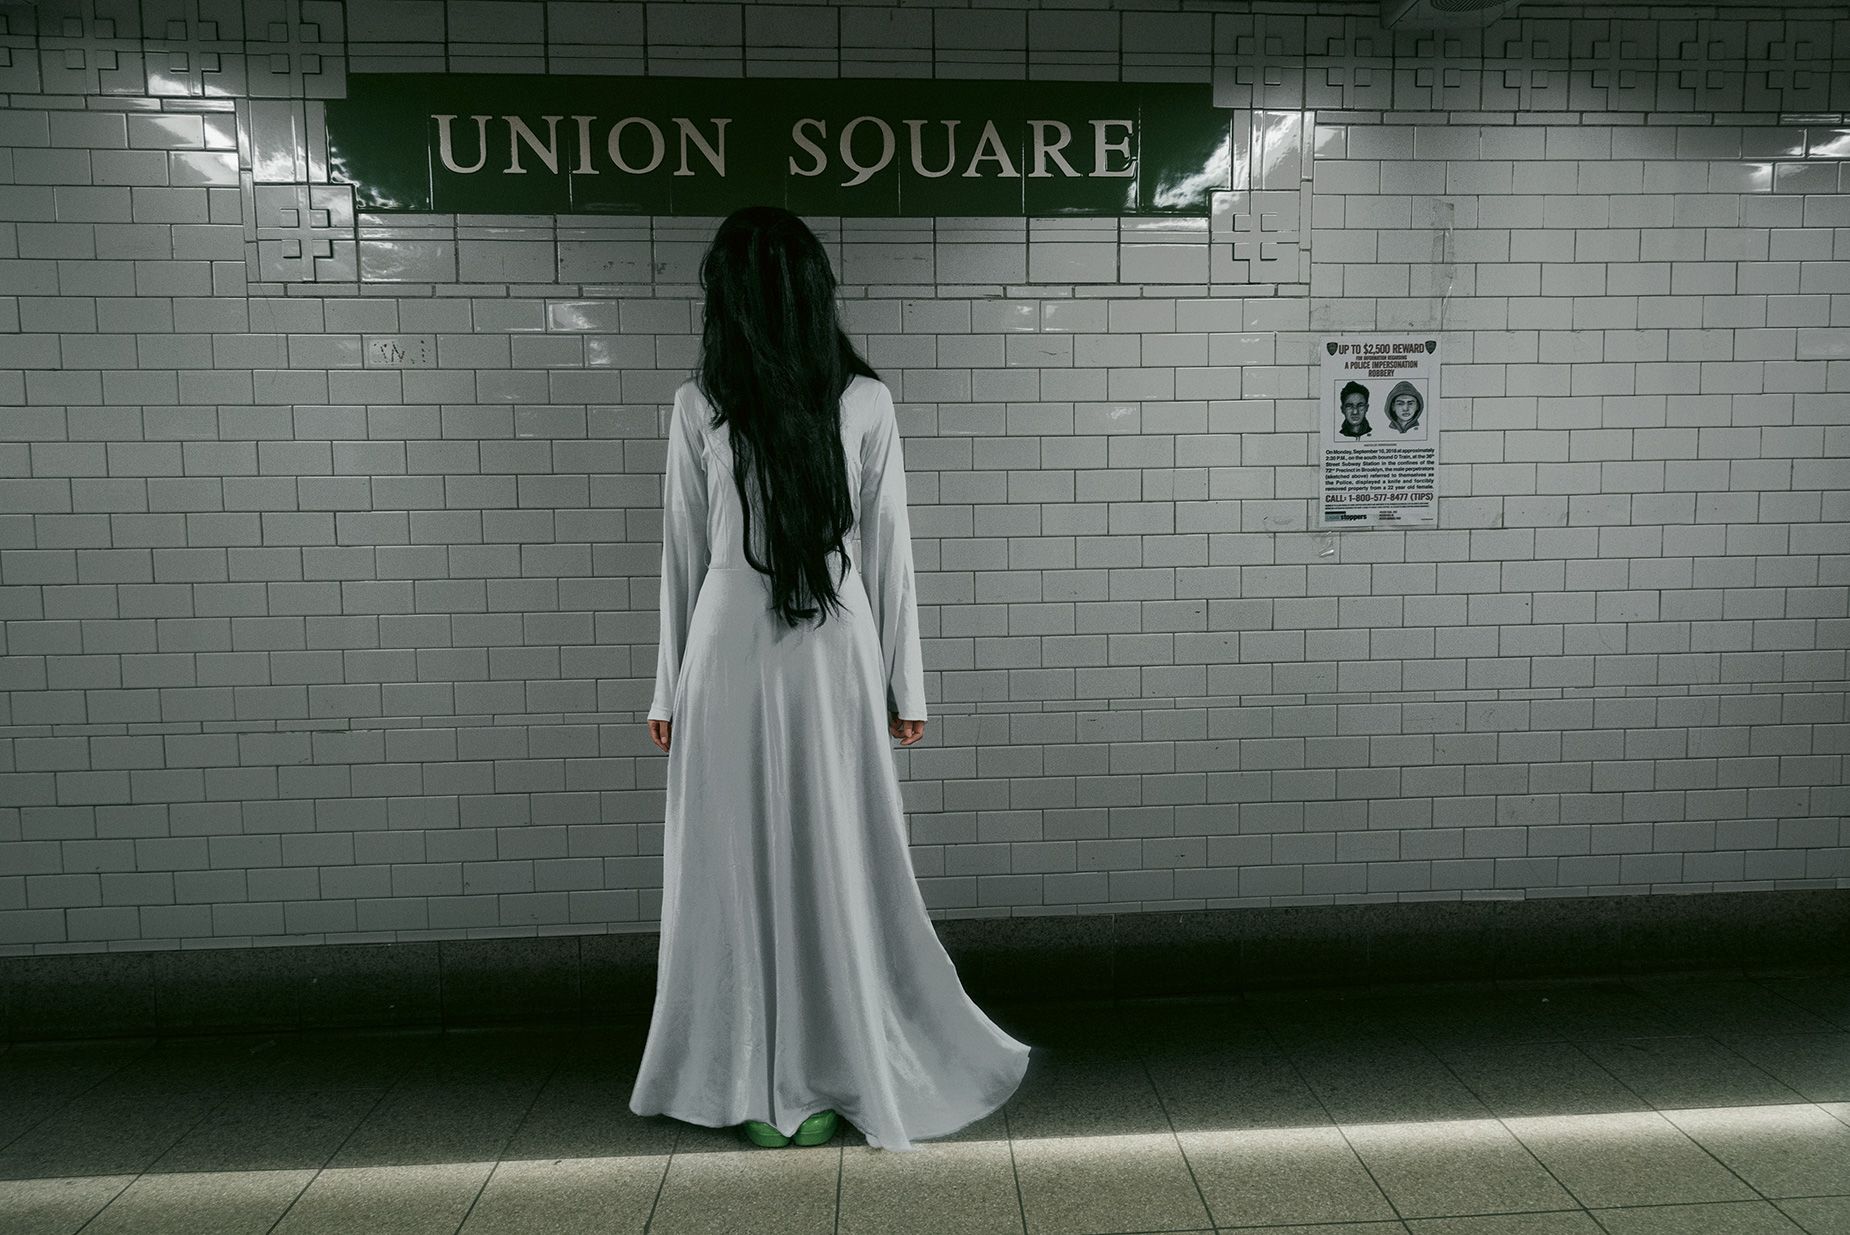 Samara from “The Ring” waits for her train at Union Square.